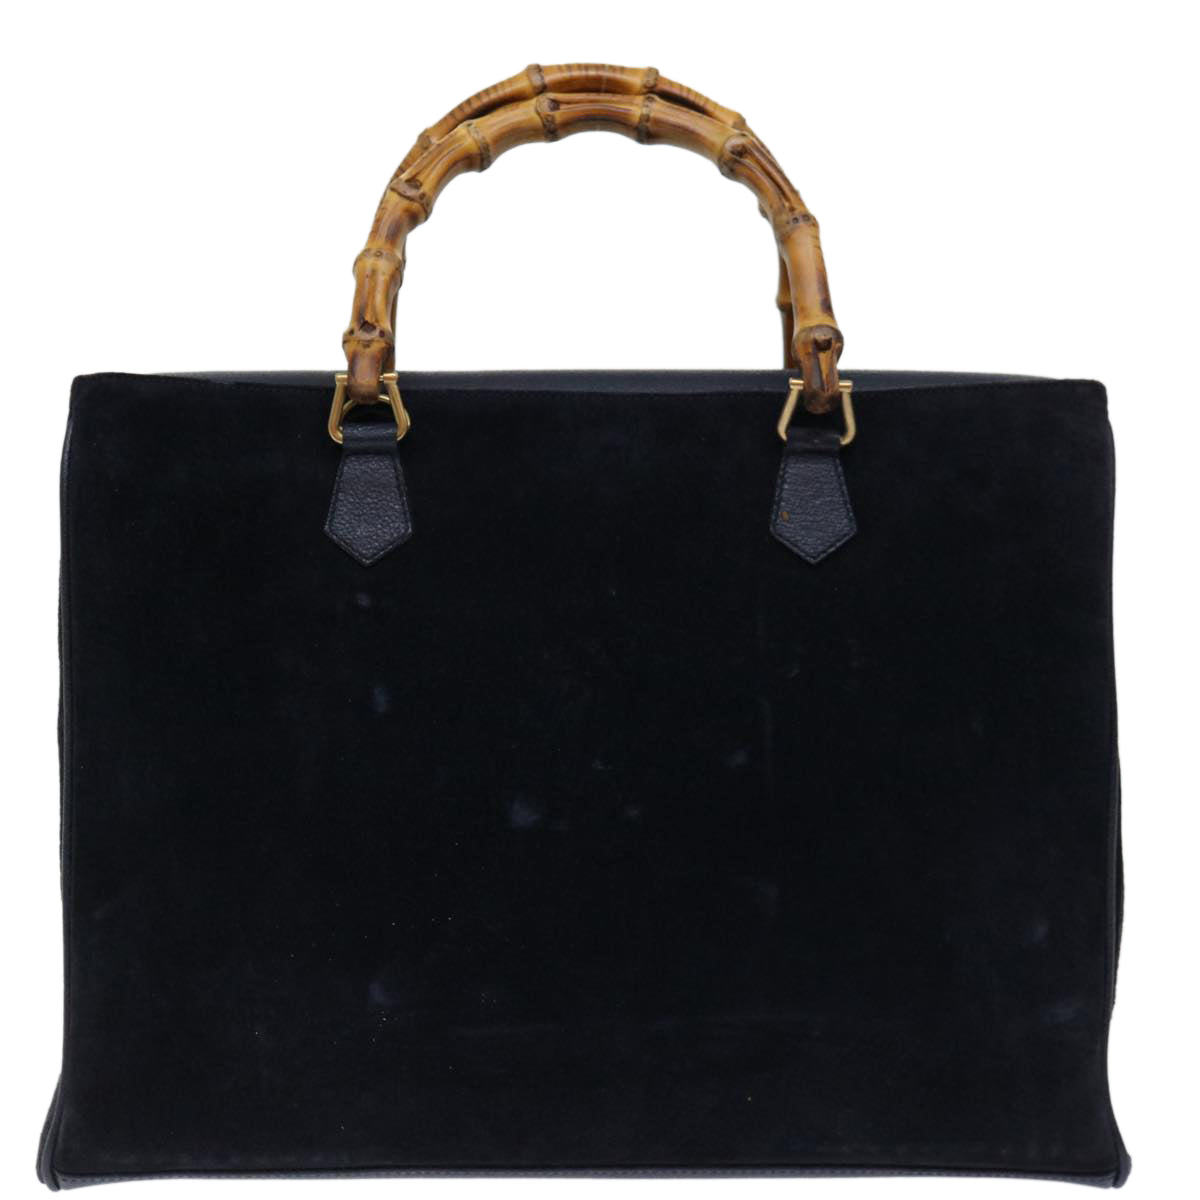 GUCCI Bamboo Tote Bag Suede 2way Black 002 2855 Auth ep3654 - 0